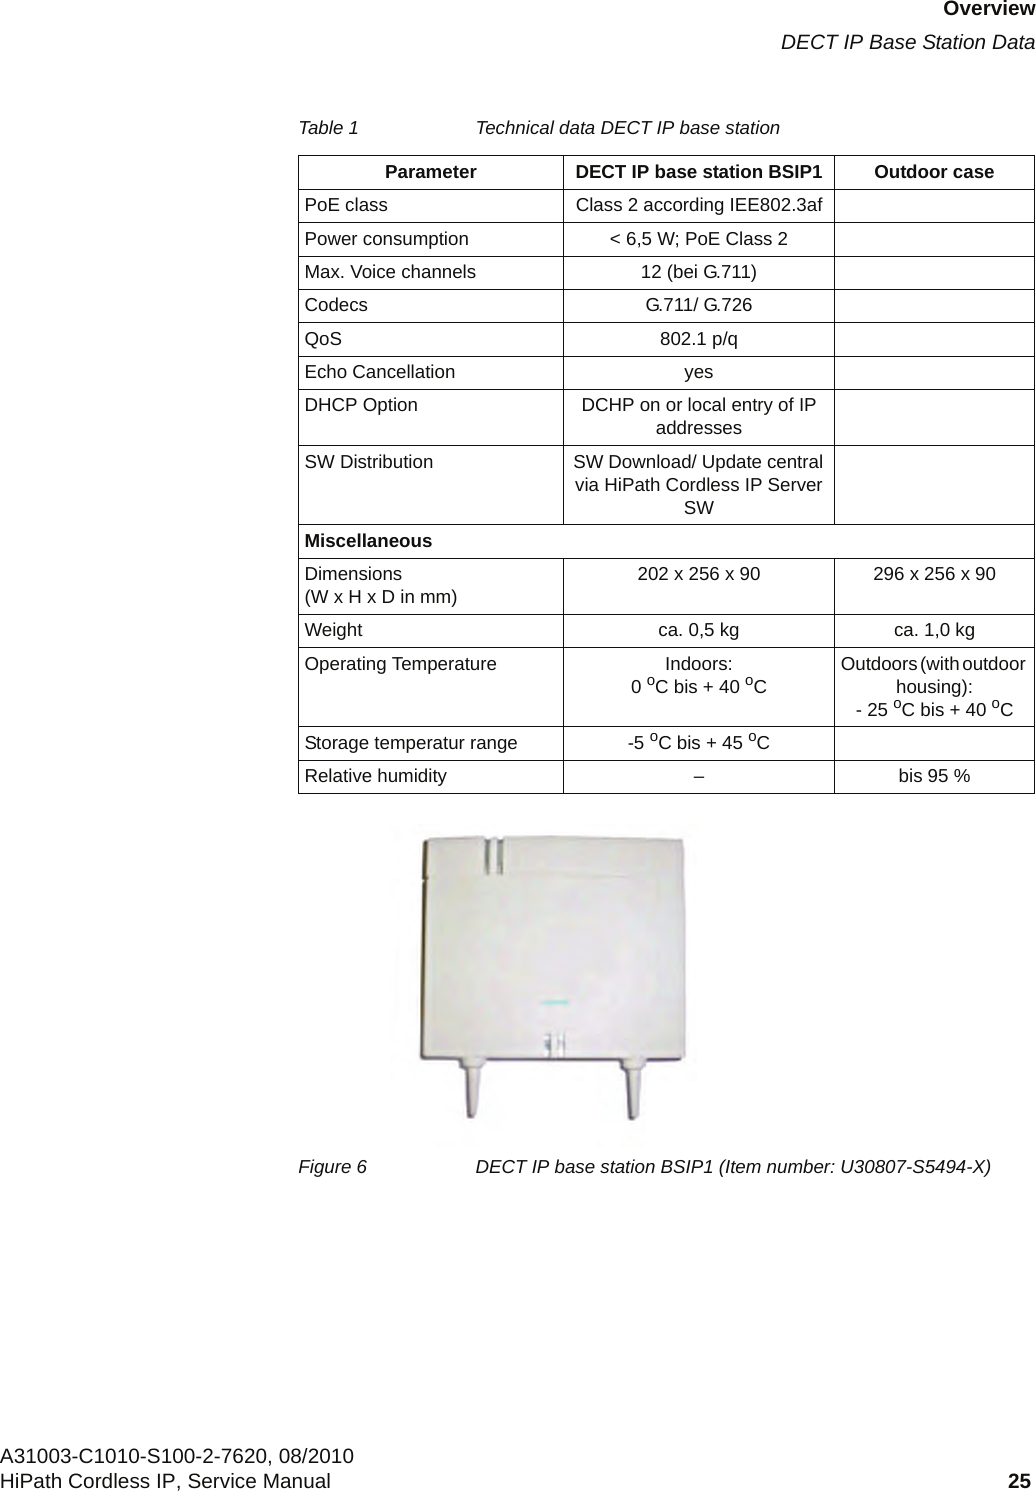 c02.fmOverviewDECT IP Base Station DataA31003-C1010-S100-2-7620, 08/2010HiPath Cordless IP, Service Manual 25           Figure 6 DECT IP base station BSIP1 (Item number: U30807-S5494-X)PoE class Class 2 according IEE802.3afPower consumption &lt; 6,5 W; PoE Class 2Max. Voice channels 12 (bei G.711)Codecs G.711/ G.726QoS 802.1 p/qEcho Cancellation yesDHCP Option DCHP on or local entry of IP addressesSW Distribution SW Download/ Update central via HiPath Cordless IP Server SWMiscellaneousDimensions (W x H x D in mm) 202 x 256 x 90 296 x 256 x 90Weight ca. 0,5 kg ca. 1,0 kgOperating Temperature Indoors:0 oC bis + 40 oC  Outdoors (with outdoor housing):- 25 oC bis + 40 oC Storage temperatur range -5 oC bis + 45 oCRelative humidity – bis 95 %Table 1 Technical data DECT IP base stationParameter DECT IP base station BSIP1 Outdoor case